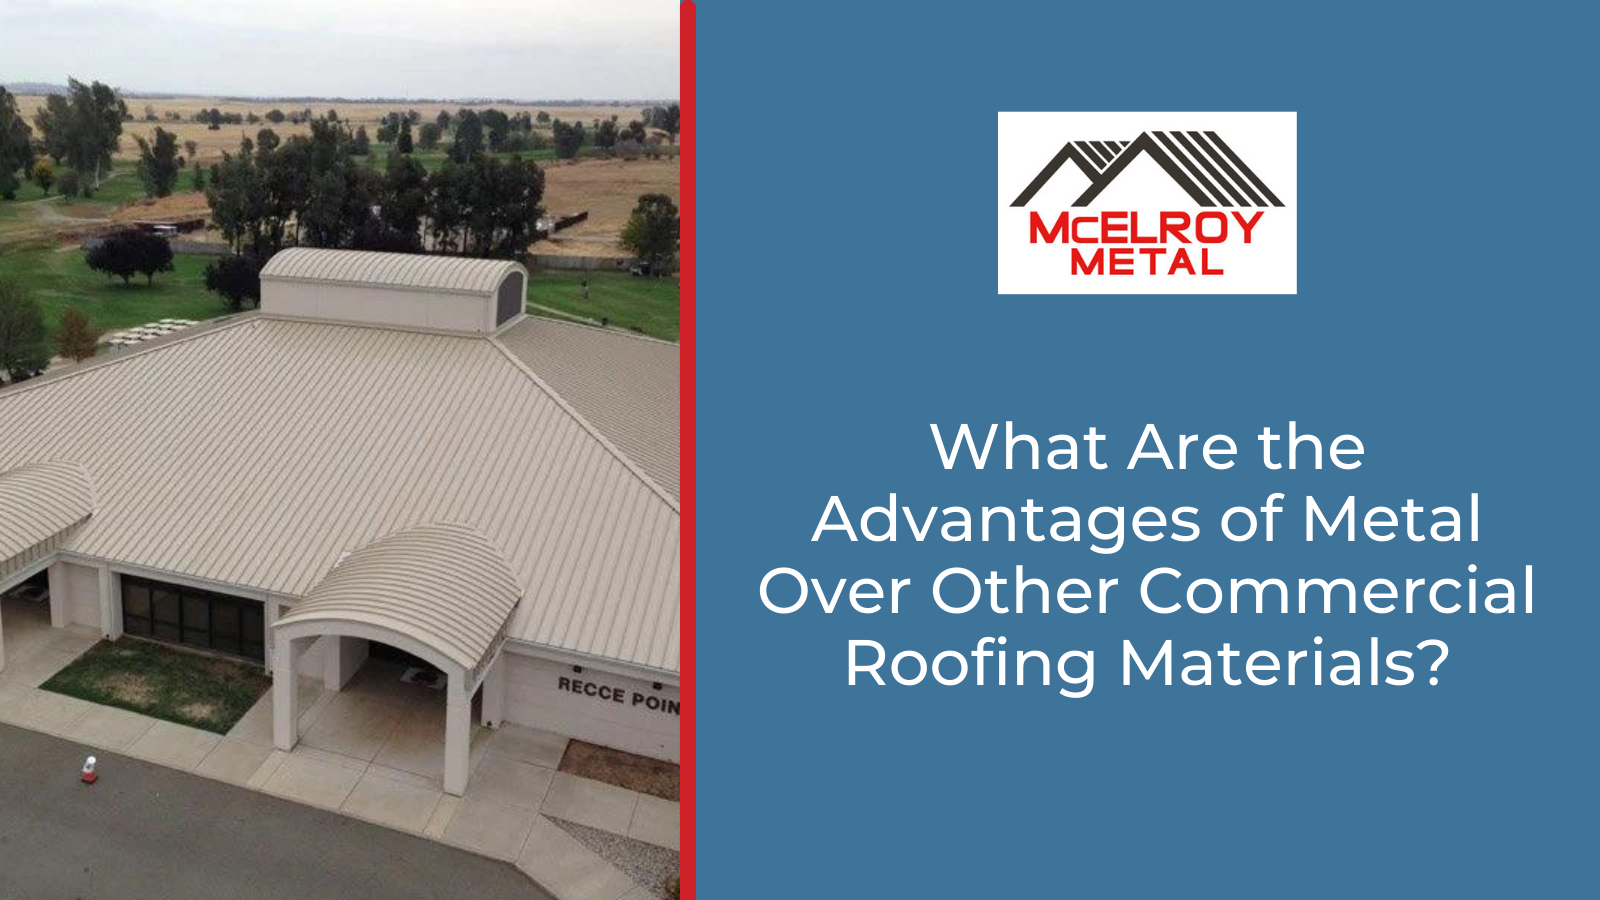 What Are the Advantages of Metal Over Other Commercial Roofing Materials?